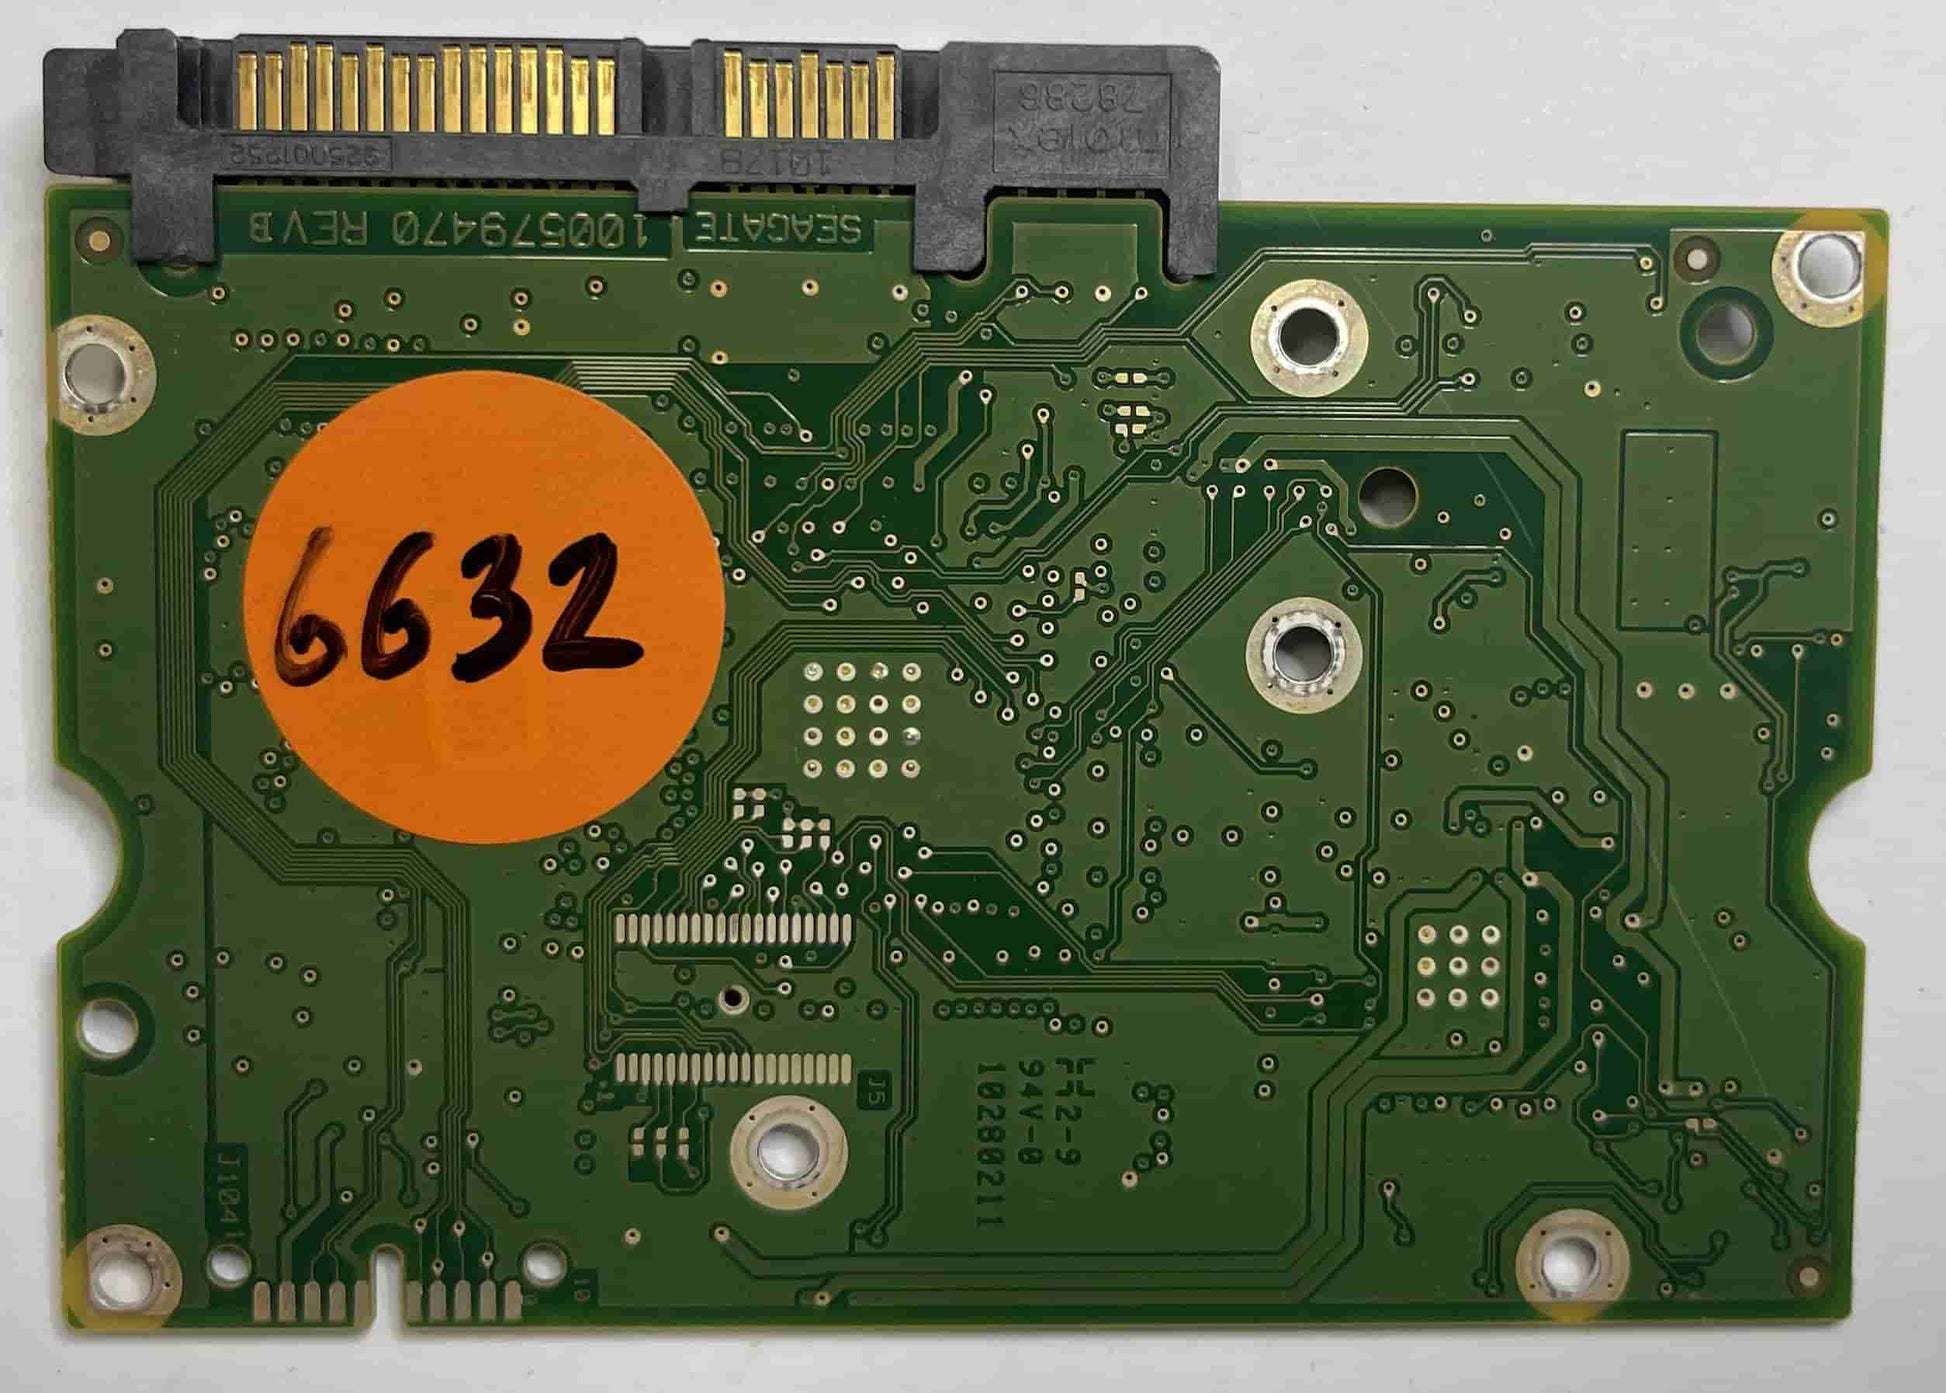 Dell ST32000644NS  100579470 REV B 9JW168-036 PCB for Sale